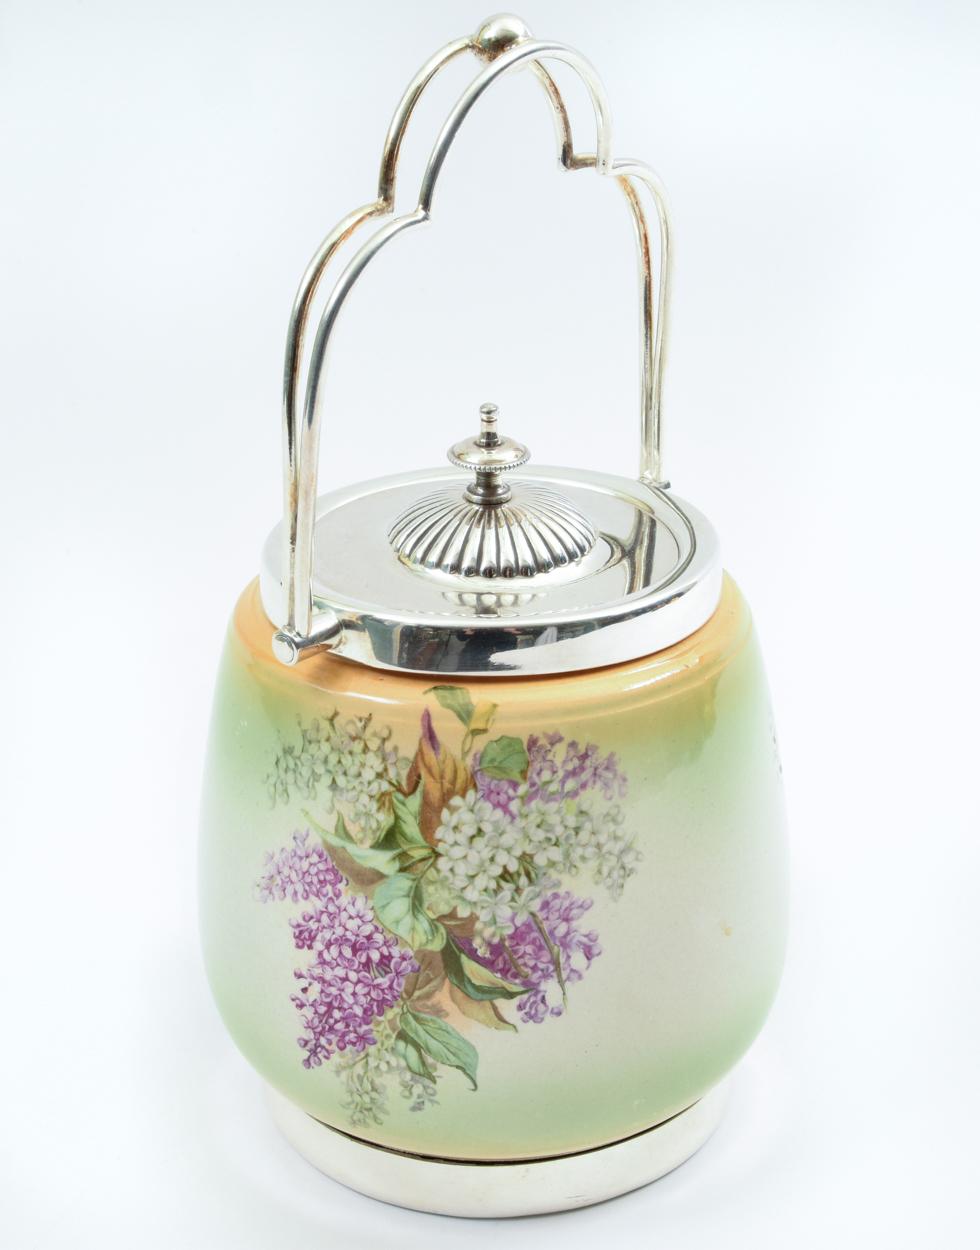 Late 19th century English porcelain with silver plate covered top ice with exterior floral design details. The ice bucket is in great condition minor wear consistent with age / use. The ice bucket measure about 10 inches high x 6 inches diameter.